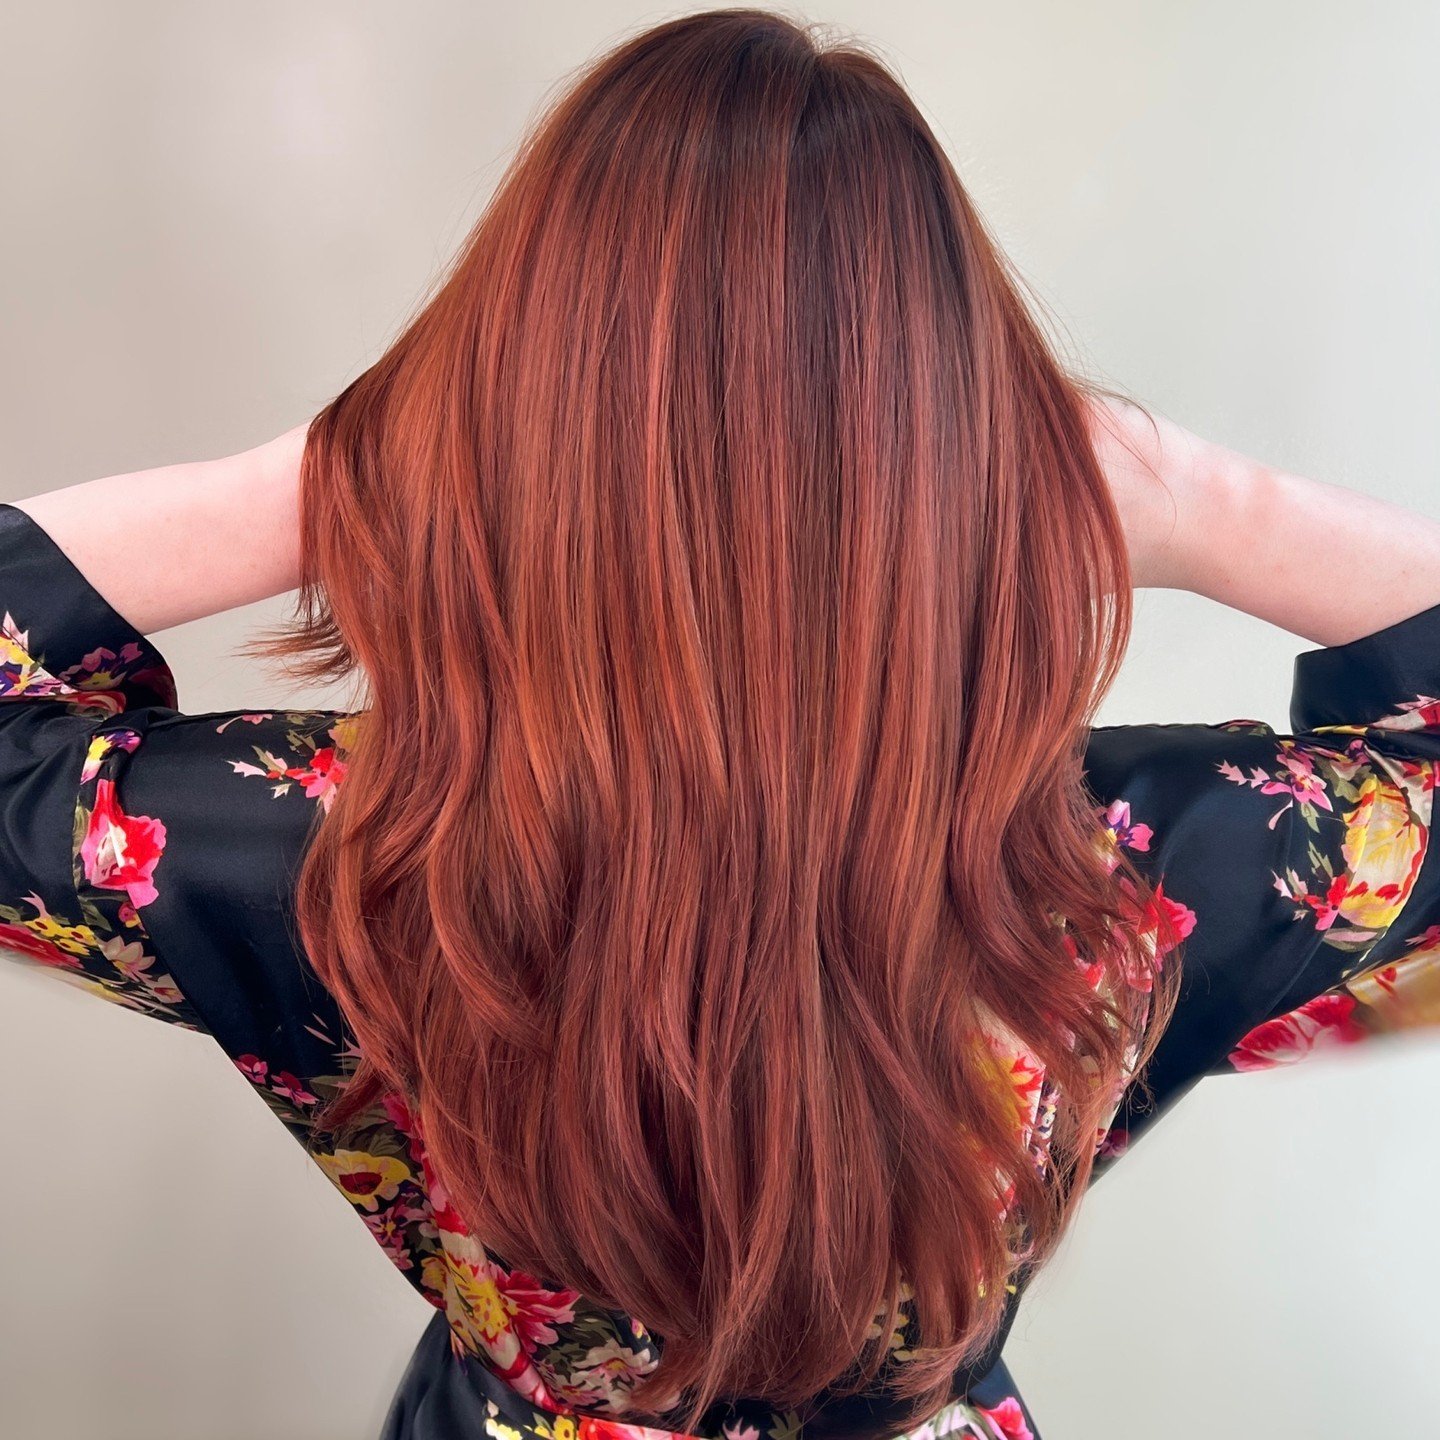 Toning shampoo for reds?  Yes, please!

We all know blondes love to incorporate purple shampoo into their hair care routine, but did you know redheads have at home toning options, too?

Using a color depositing shampoo like Milbon Sophistone Color Ba